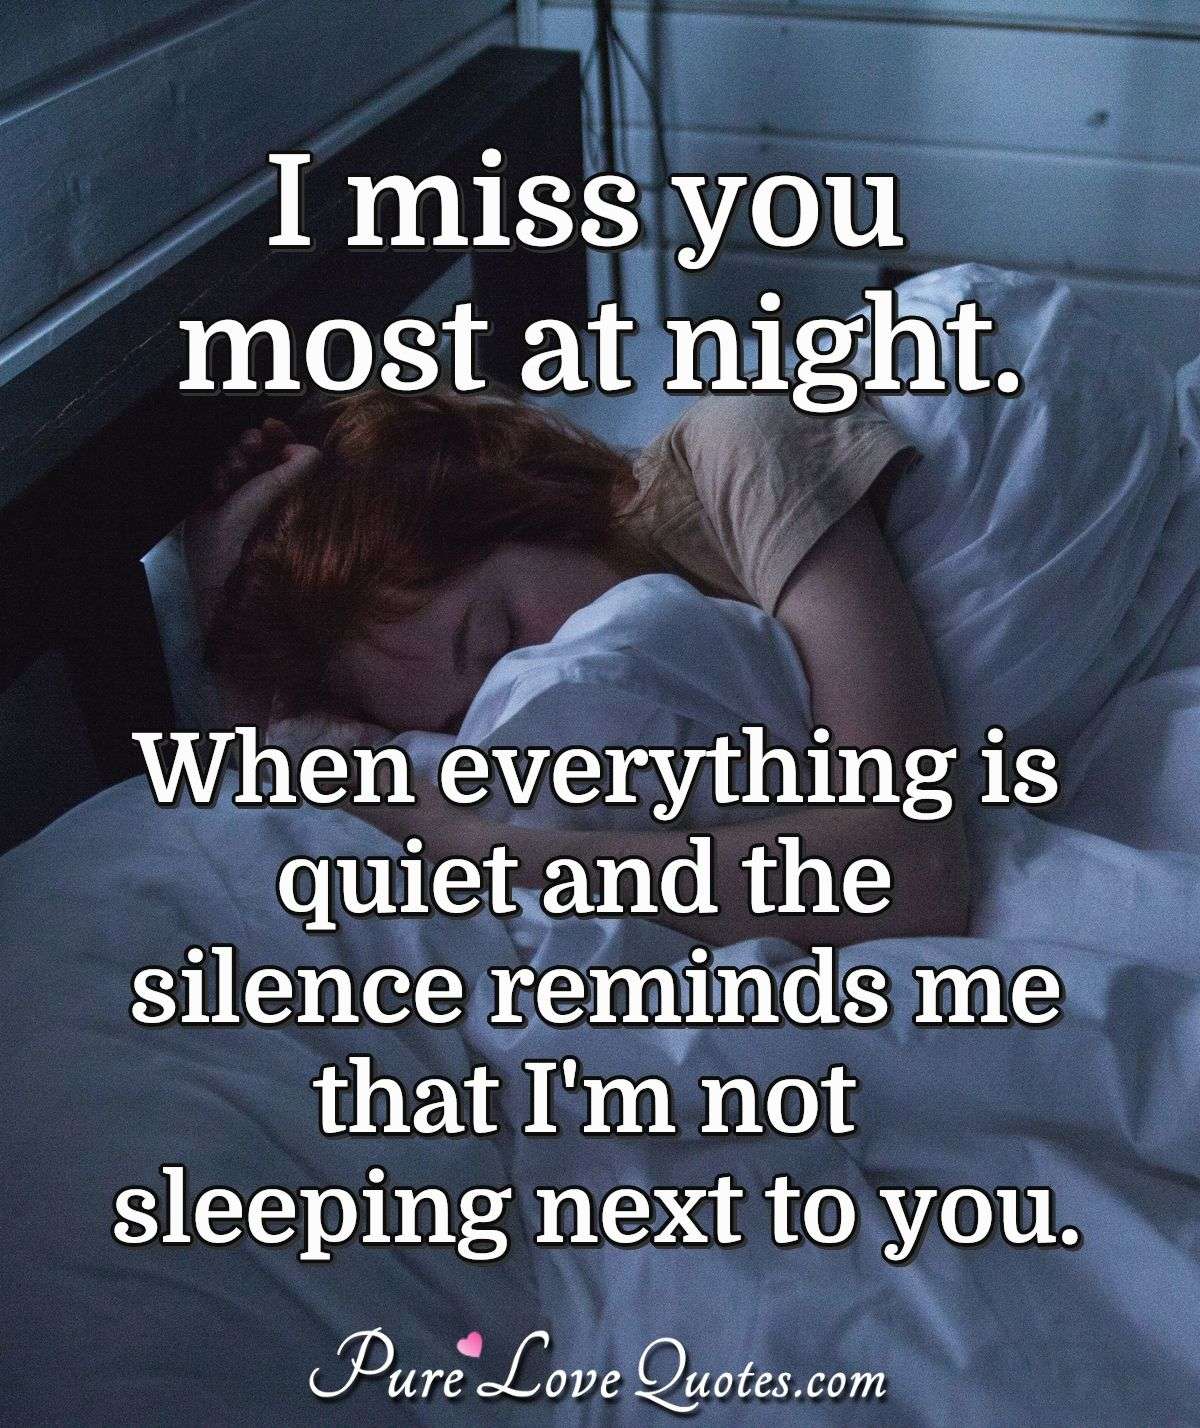 I miss you most at night. When everything is quiet and the silence reminds me that I'm not sleeping next to you. - Anonymous